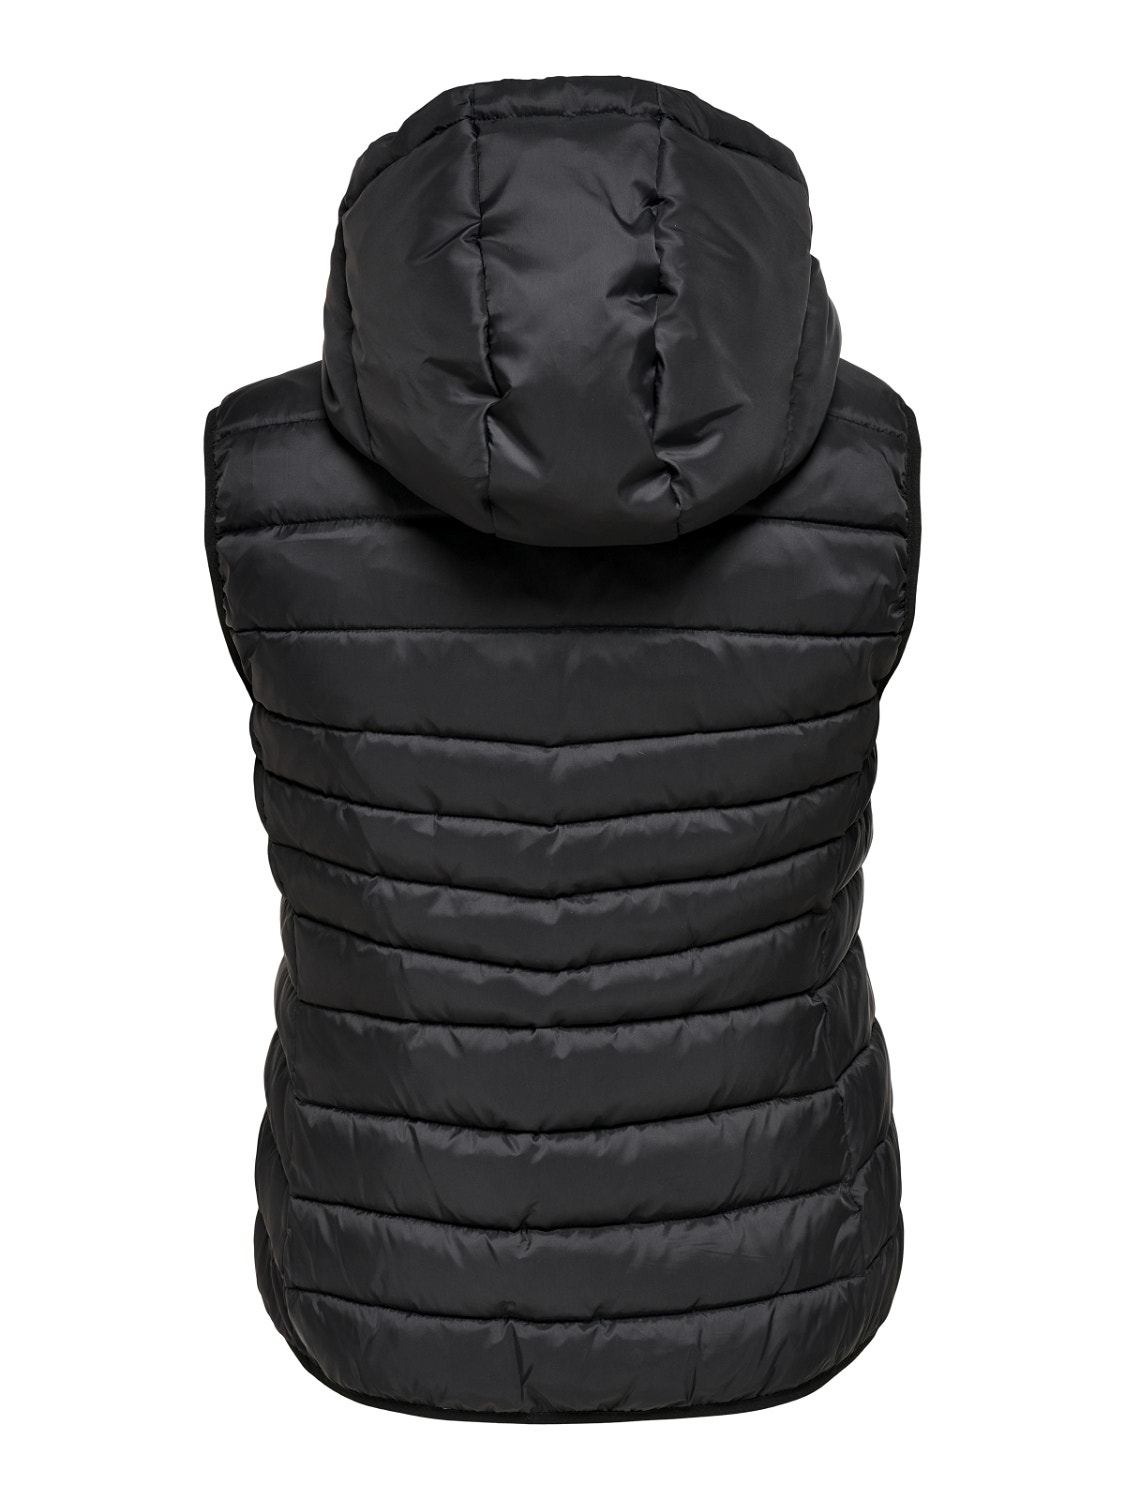 ONLY Gilets anti-froid Capuche -Black - 15236003